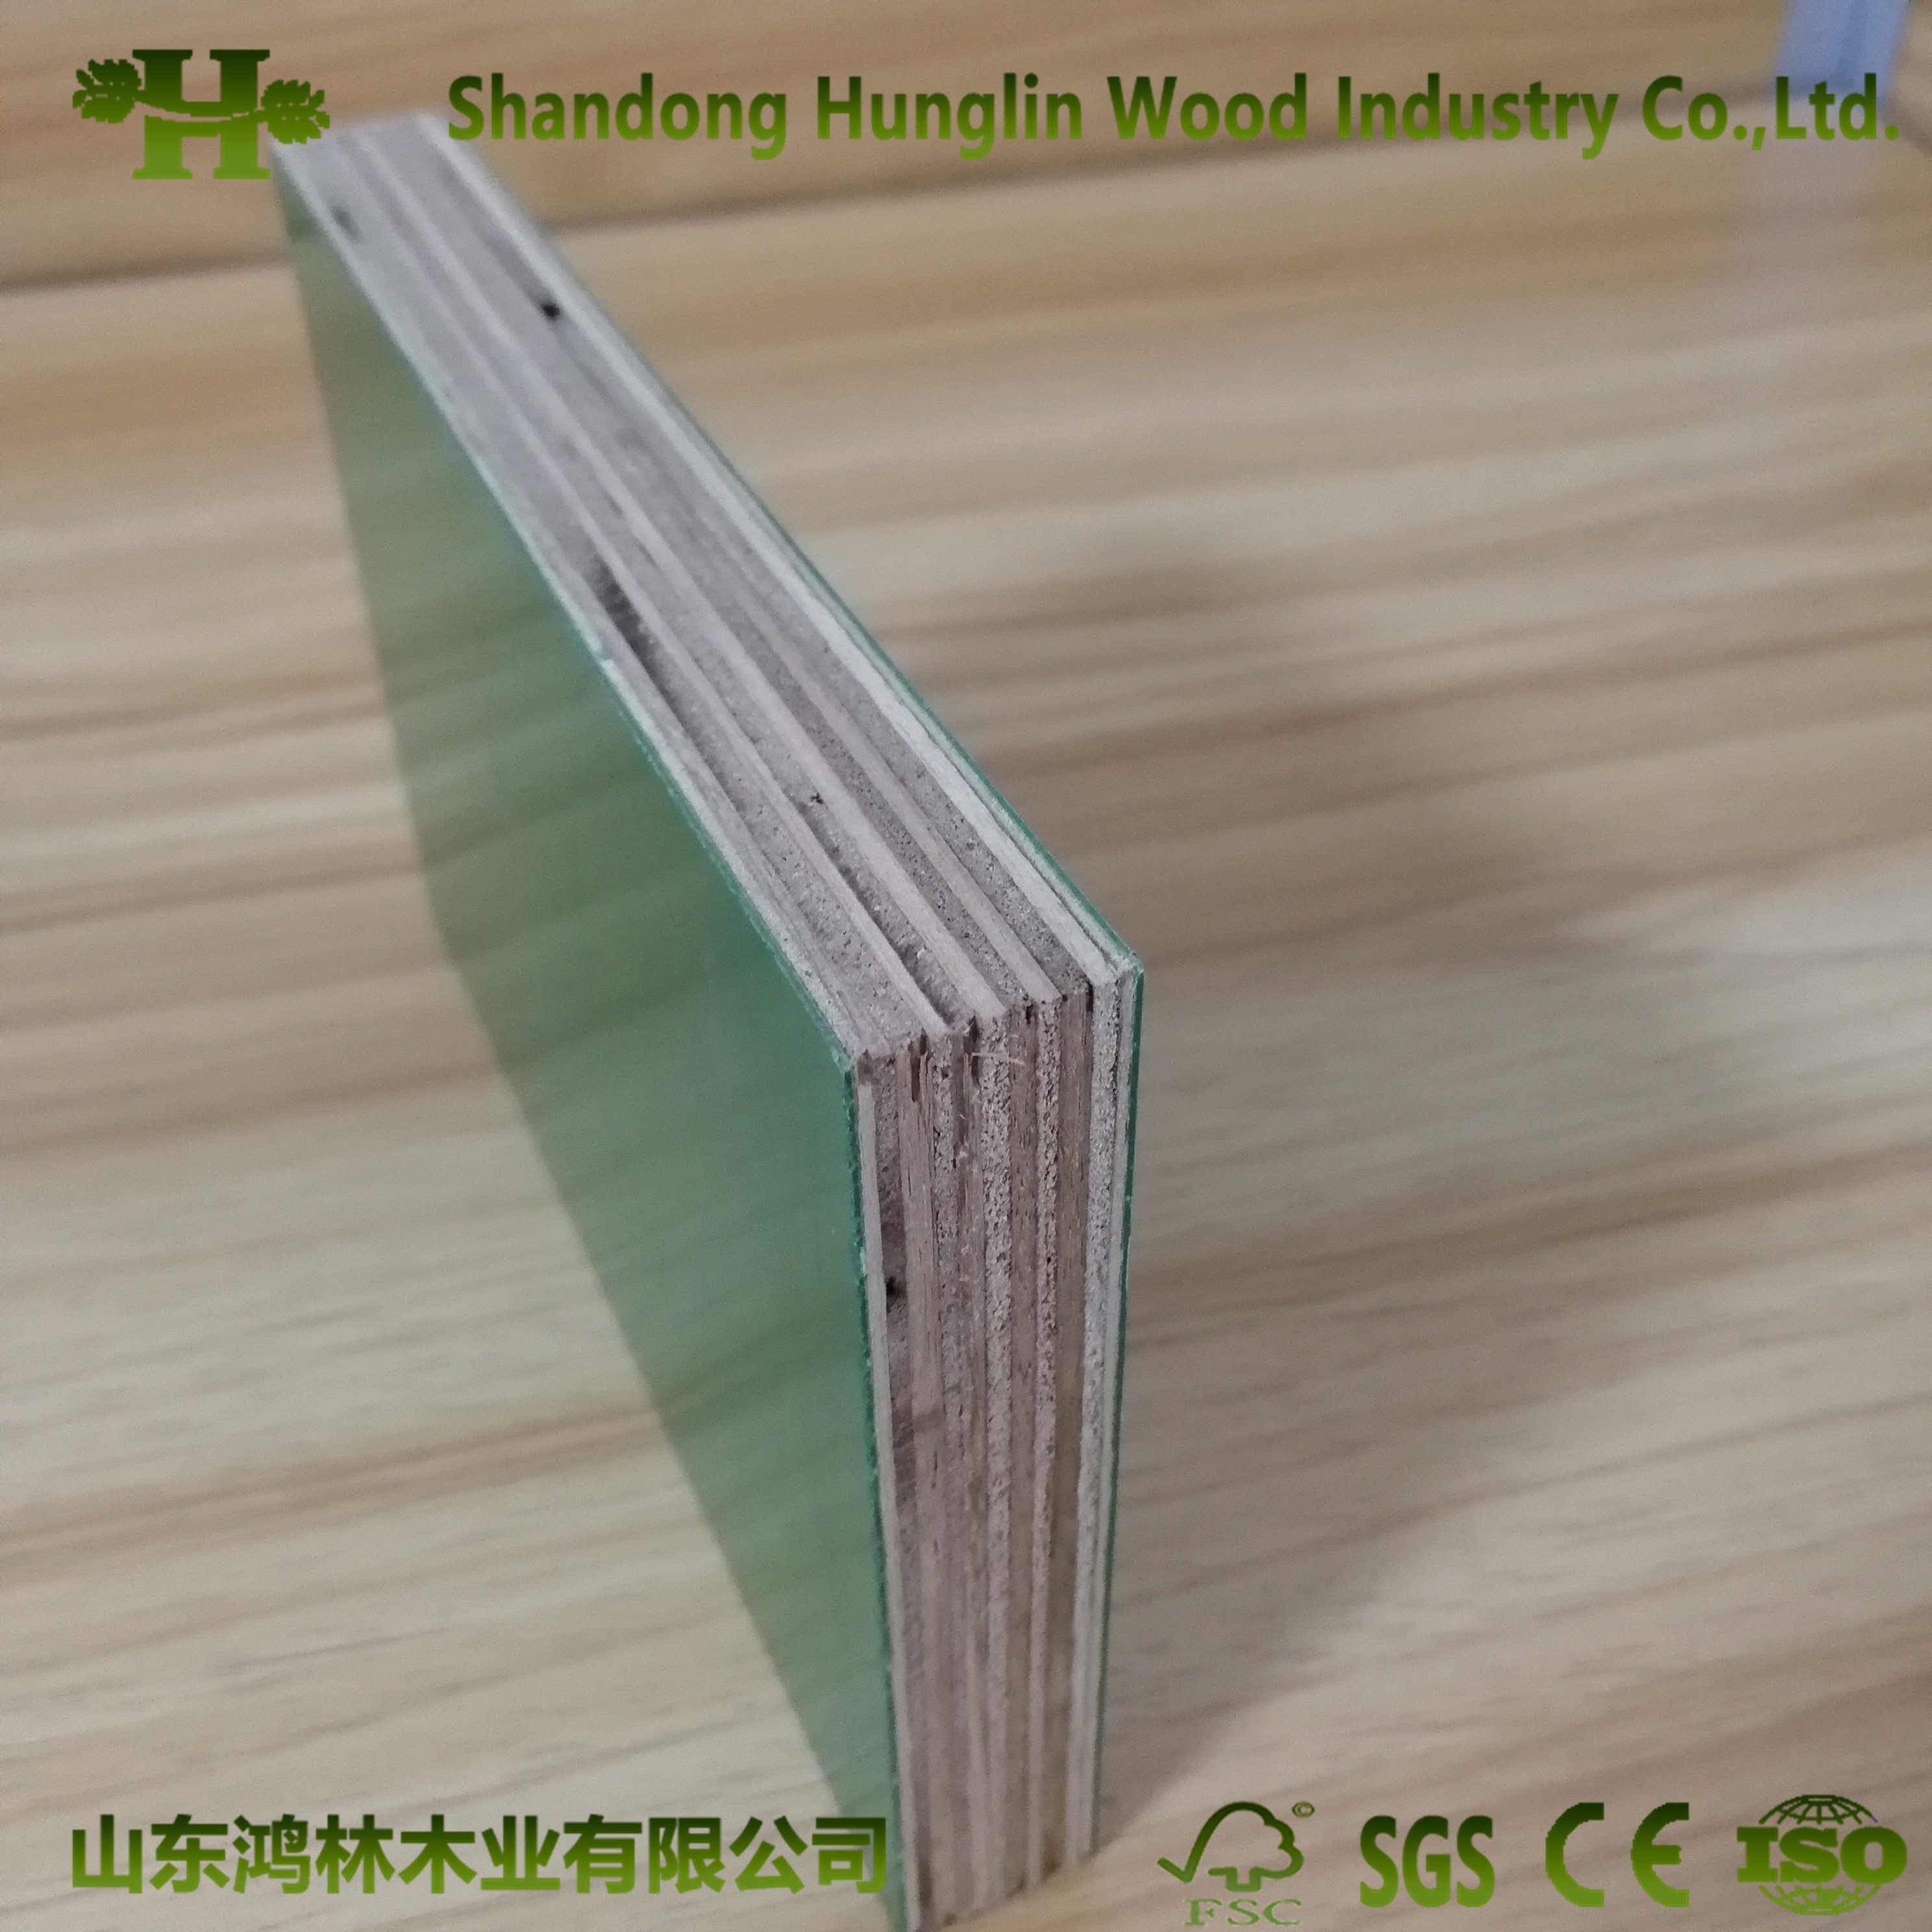 Reusable Glossy PP Plastic Polypropylene Film Faced Plywood for Construction Usage